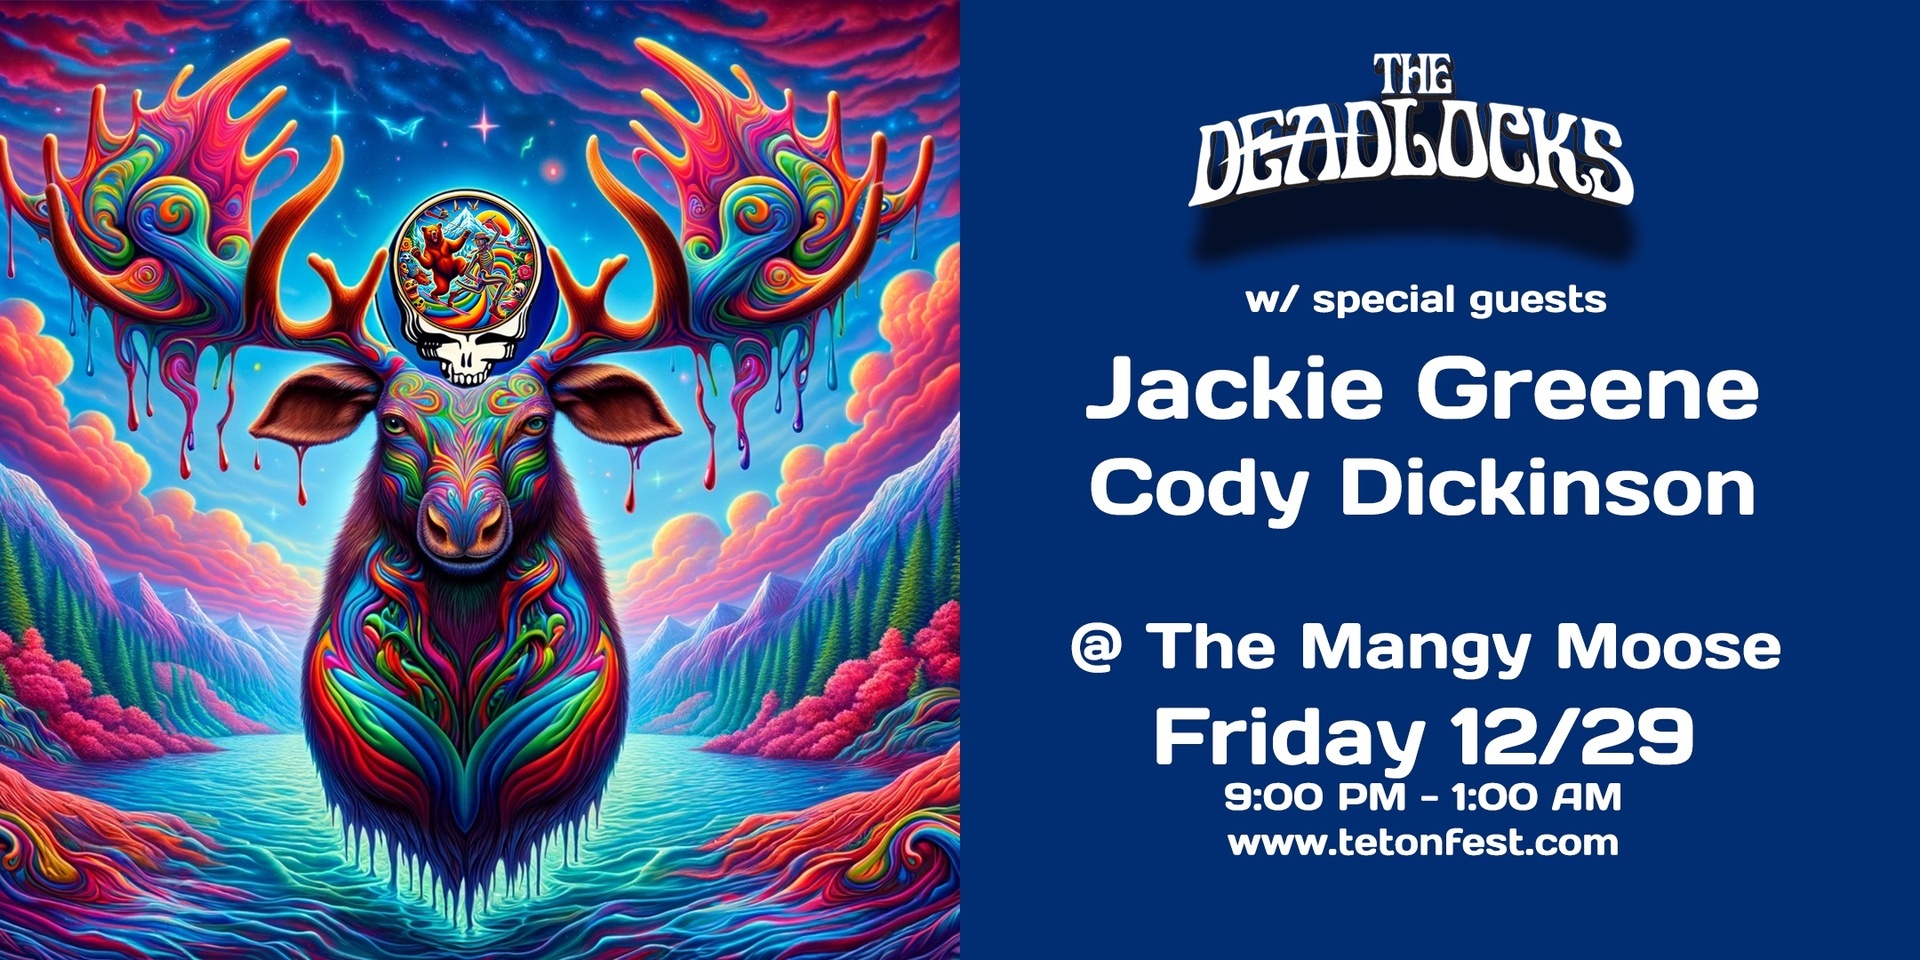 The Deadlocks feat. Jackie Greene and Cody Dickinson @ The Mangy Moose, Teton Village, Wyoming, United States